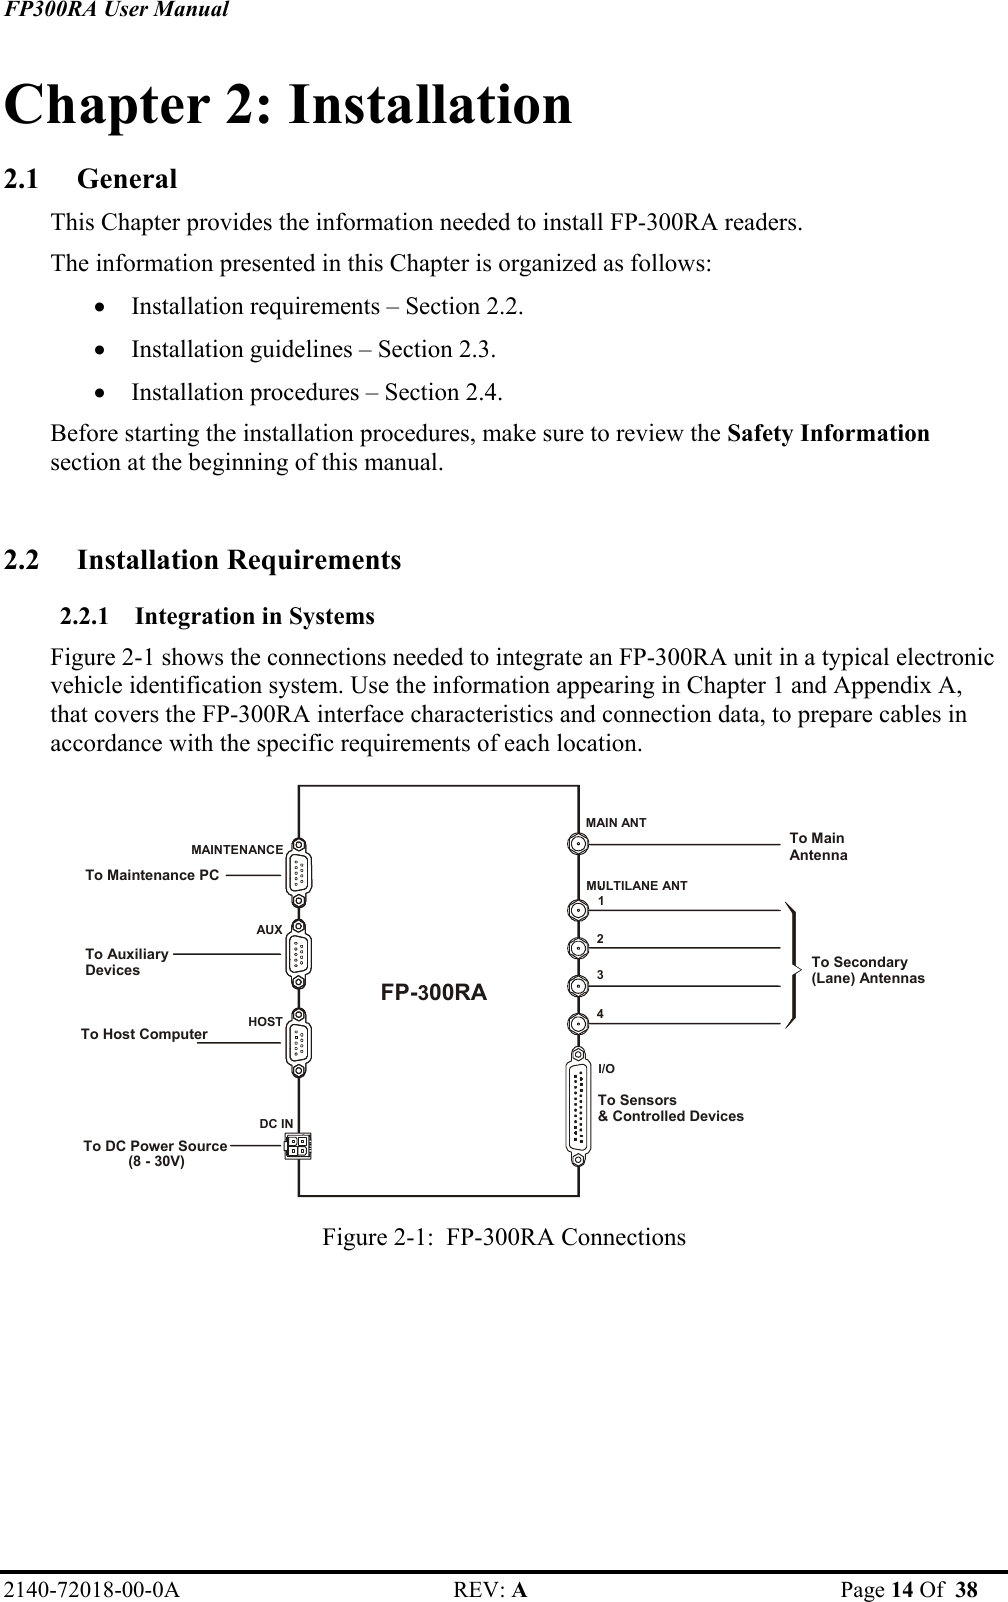 FP300RA User Manual 2140-72018-00-0A REV: A  Page 14 Of  38  Chapter 2: Installation 2.1 General This Chapter provides the information needed to install FP-300RA readers. The information presented in this Chapter is organized as follows: • Installation requirements – Section 2.2. • Installation guidelines – Section 2.3. • Installation procedures – Section 2.4. Before starting the installation procedures, make sure to review the Safety Information section at the beginning of this manual.   2.2 Installation Requirements 2.2.1 Integration in Systems Figure 2-1 shows the connections needed to integrate an FP-300RA unit in a typical electronic vehicle identification system. Use the information appearing in Chapter 1 and Appendix A, that covers the FP-300RA interface characteristics and connection data, to prepare cables in accordance with the specific requirements of each location.  1234I/OMULTILANE ANTDC IN AUX HOST                      MAINTENANCE FP-300RA To Maintenance PC To Auxiliary Devices To Host Computer To DC Power Source  (8 - 30V) To Main Antenna To Sensors&amp; Controlled DevicesMAIN ANTTo Secondary(Lane) Antennas Figure 2-1:  FP-300RA Connections   